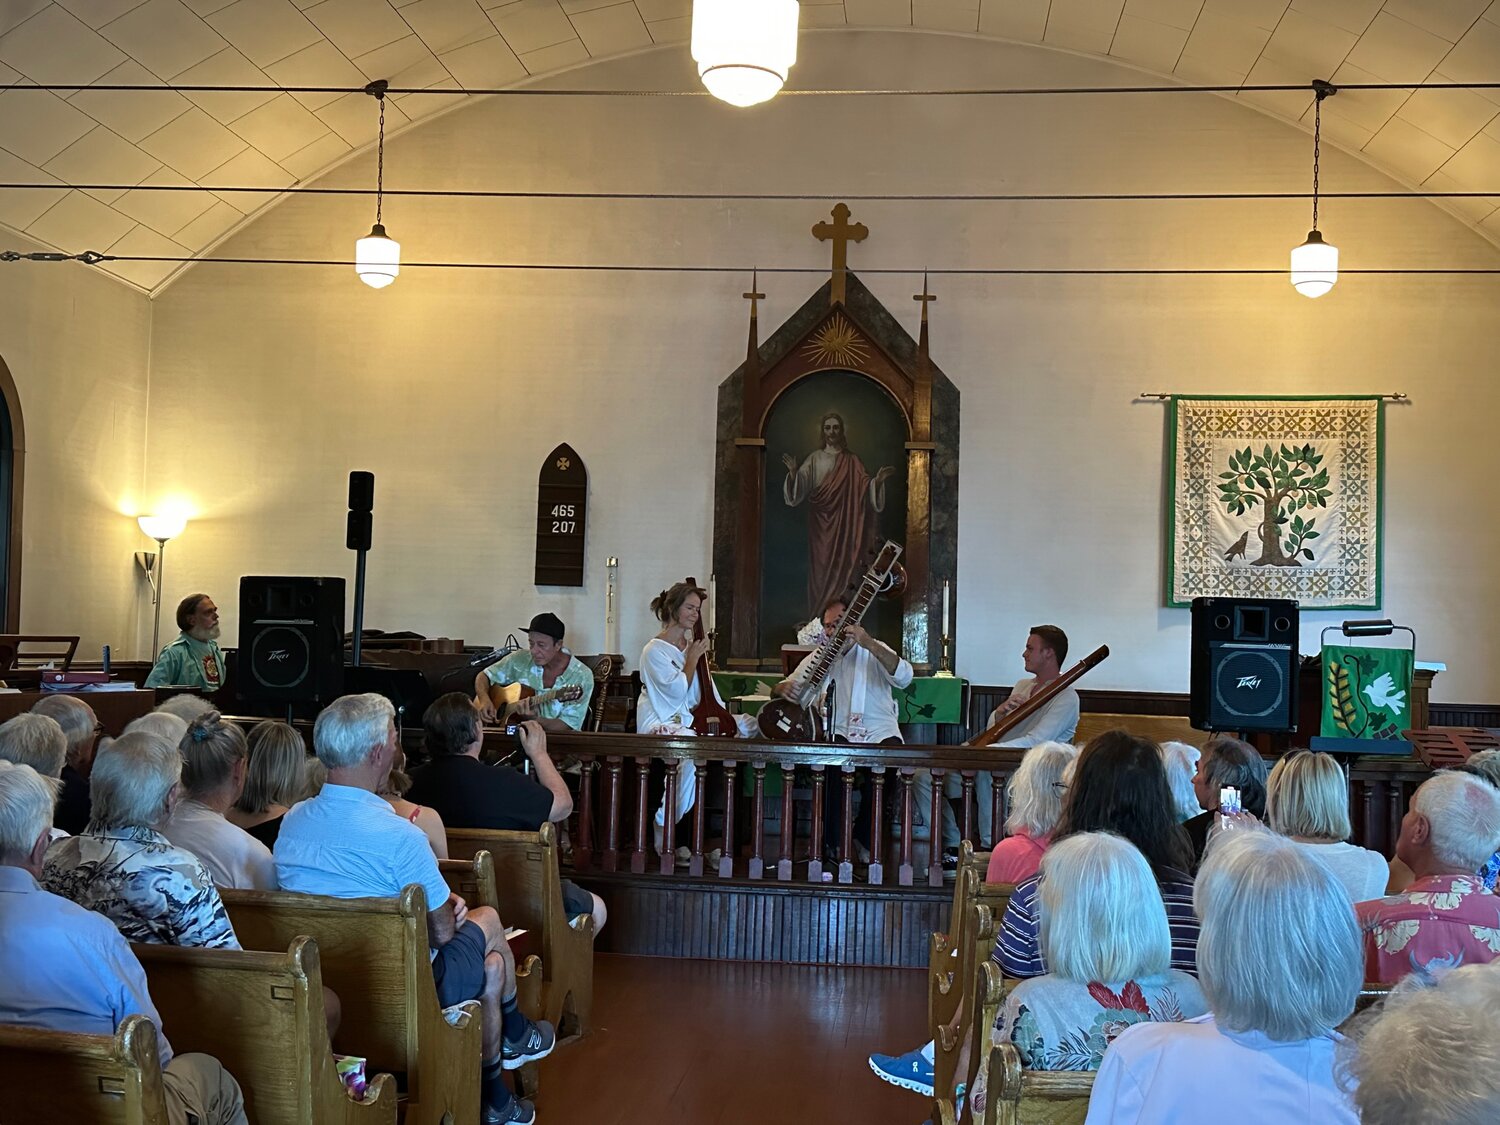 A joint fundraiser for Point Roberts Circle of Care and Trinity Church brought together an outstanding group of musicians on August 3 at Trinity Church. Performers: Joseph Siegle, Shaune Ann Feuz, Scott Baird, Scott Hackleman, Laura Mitchell, Alex Baird, and Gerry Barnum.